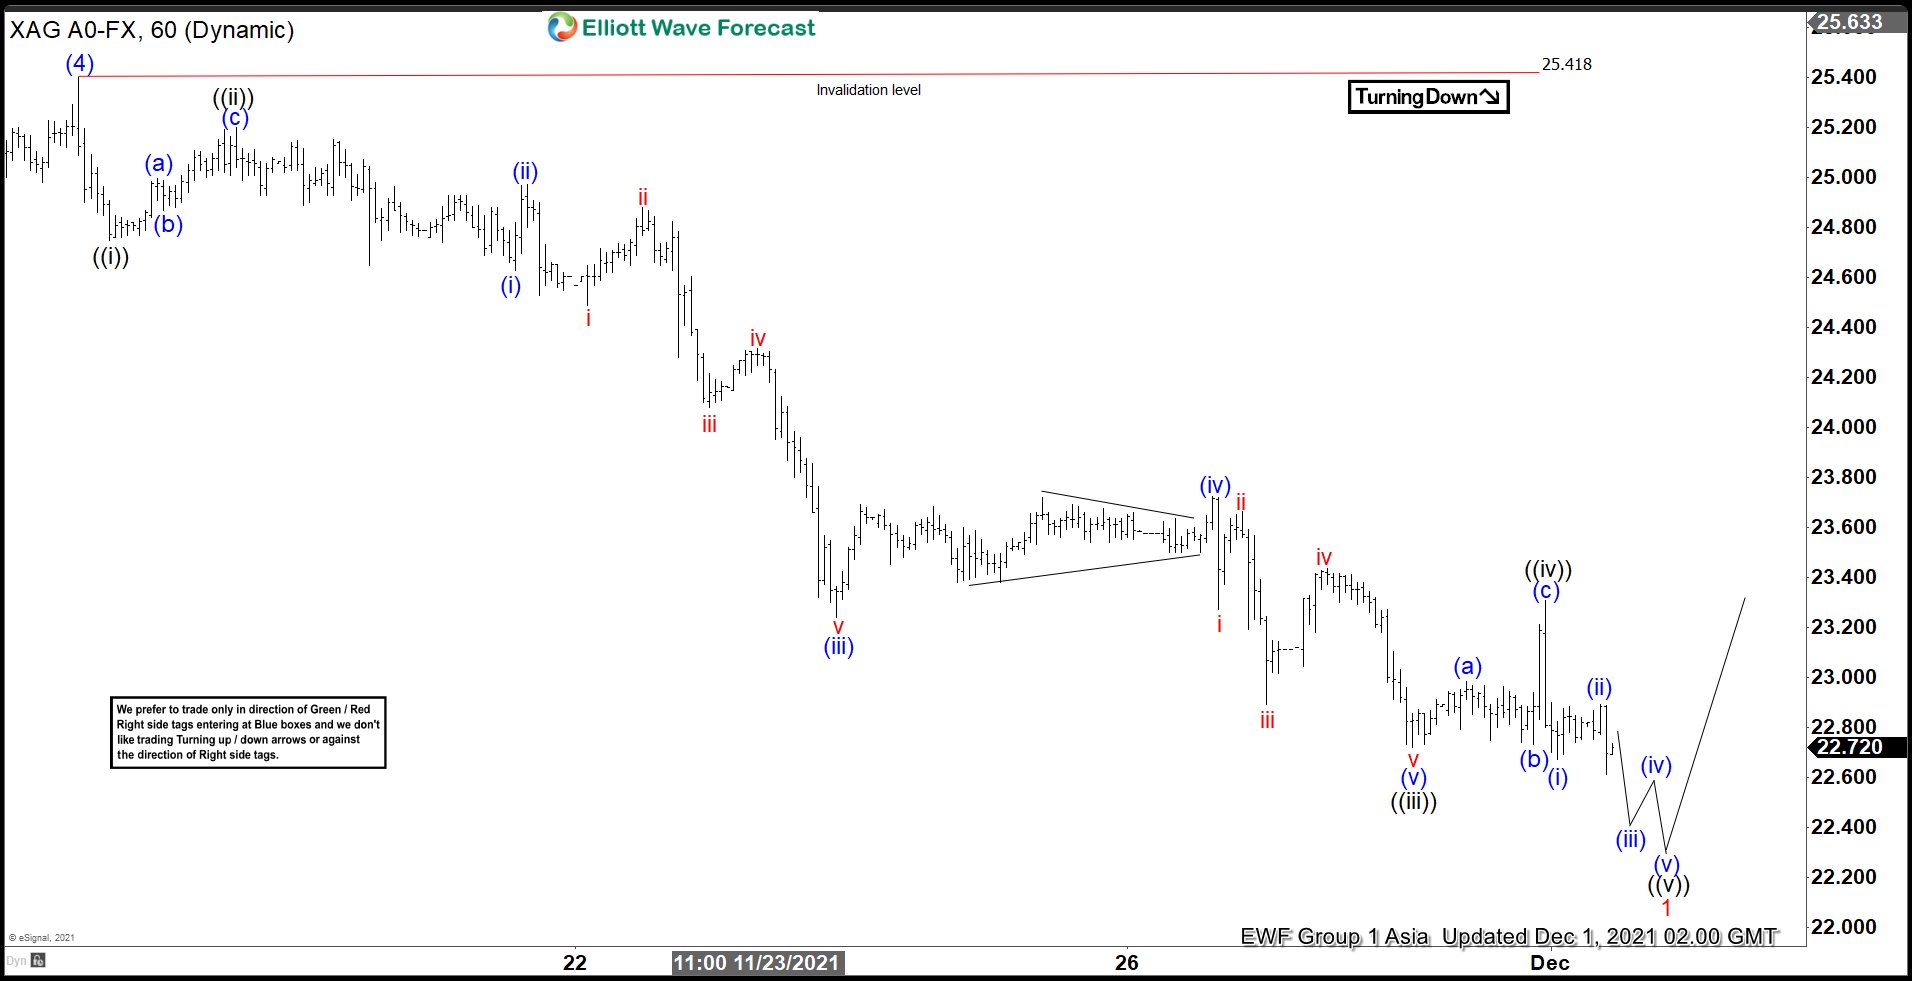 Elliott Wave View: Silver Looking to End 5 Waves